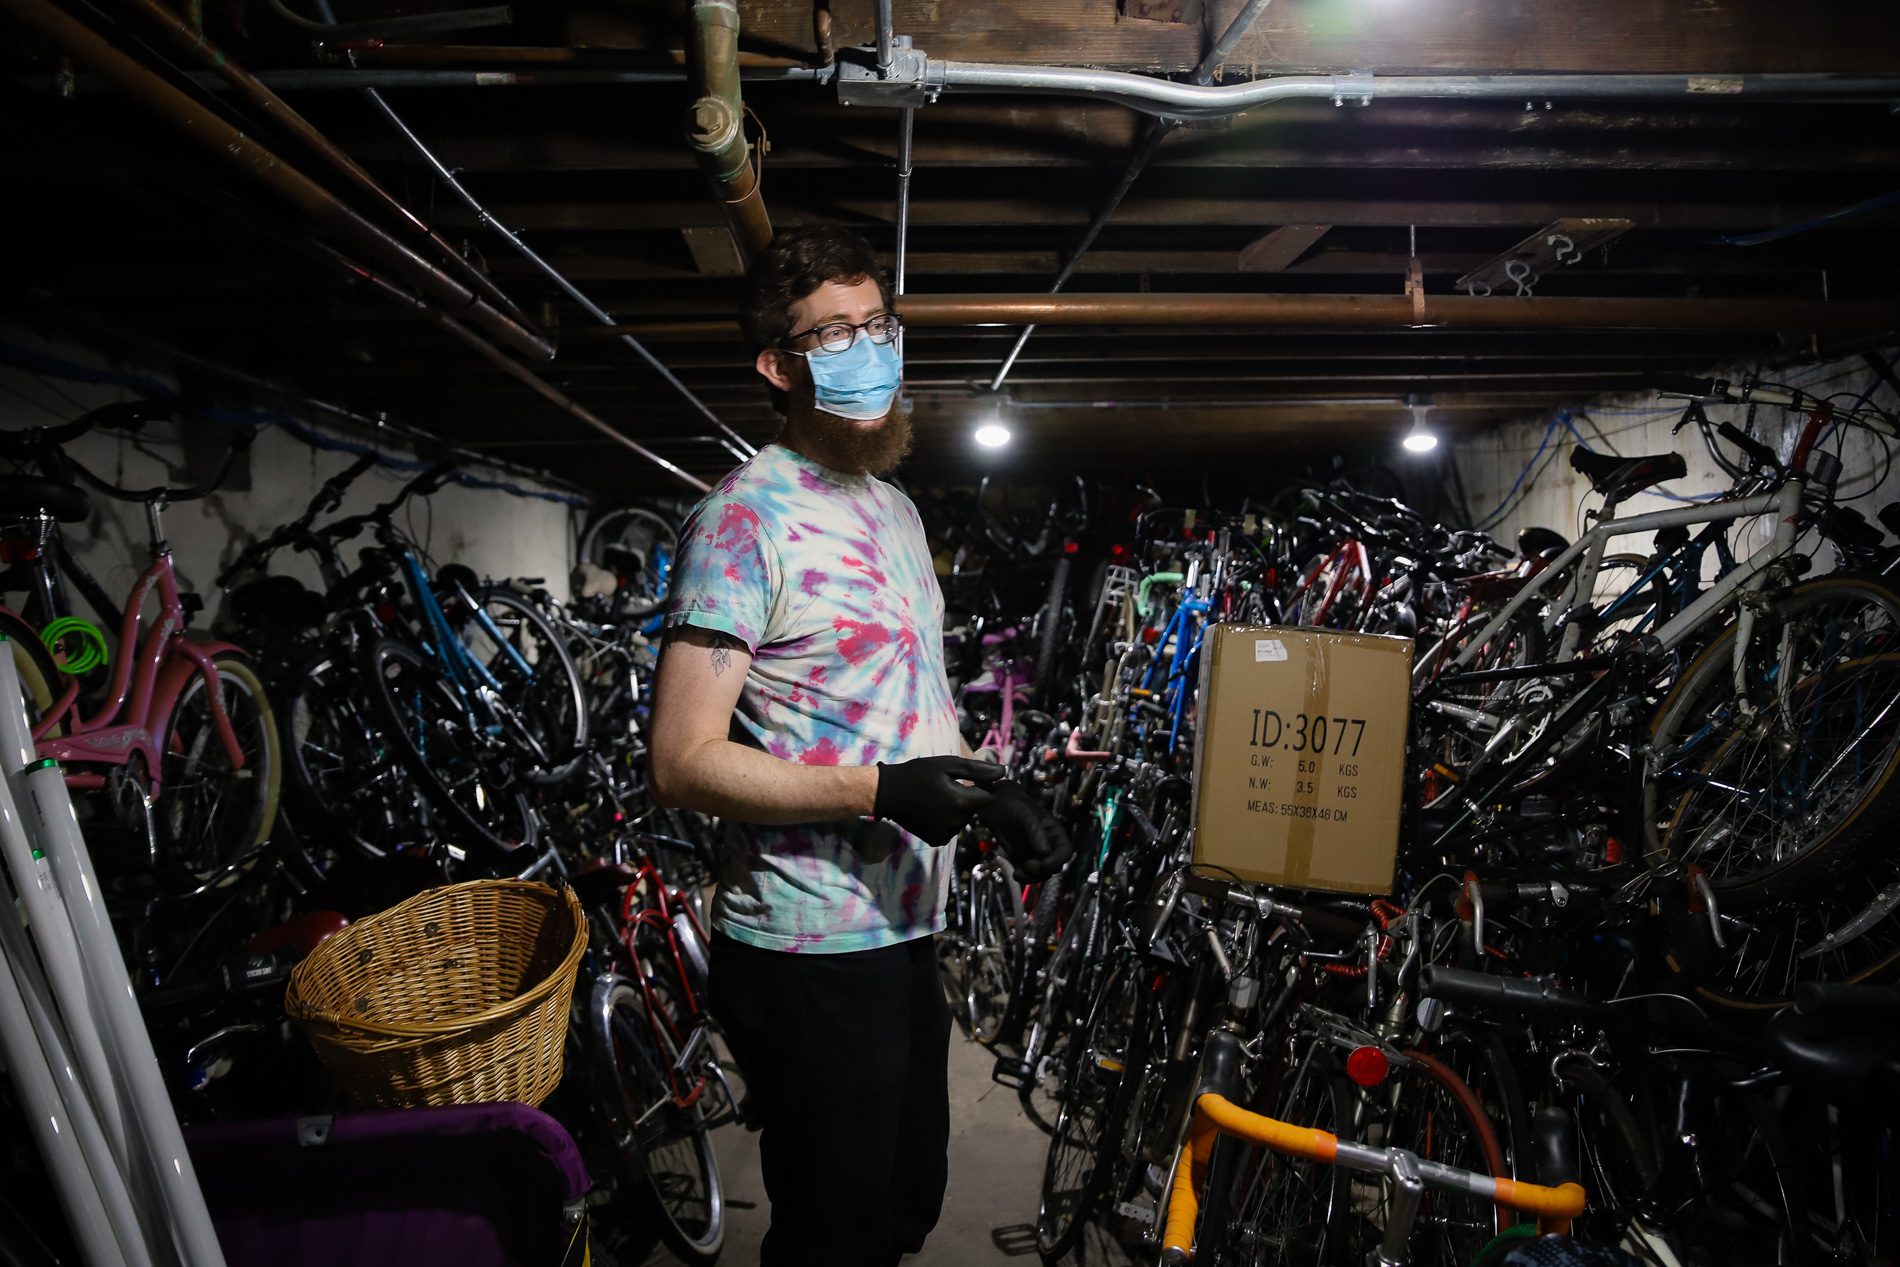 Dana Smith surrounded by bicycles piled up to the ceiling of a basement